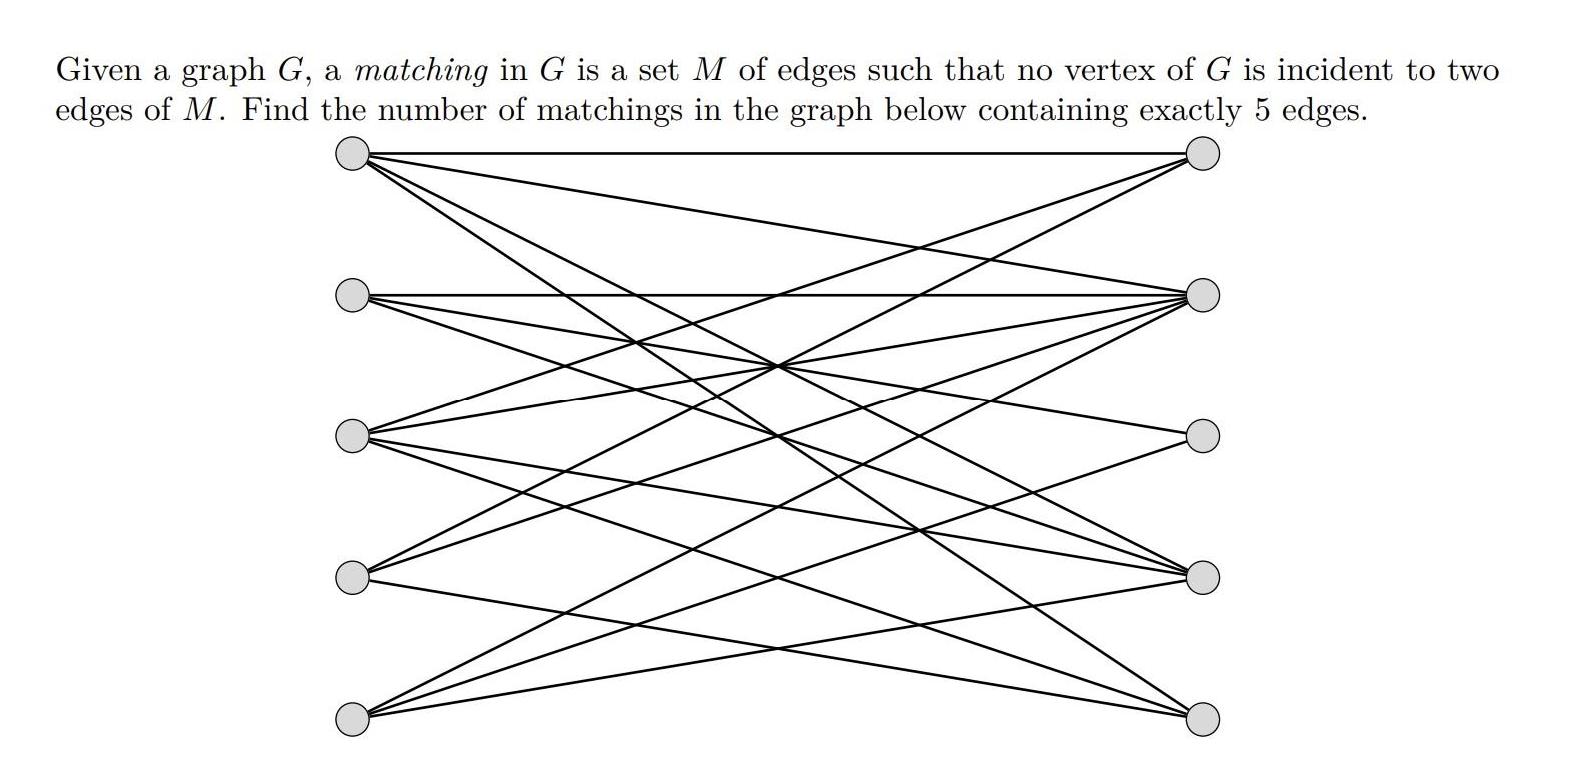 Given a graph G, a matching in G is a set M of edges such that no vertex of G is incident to two edges of M.